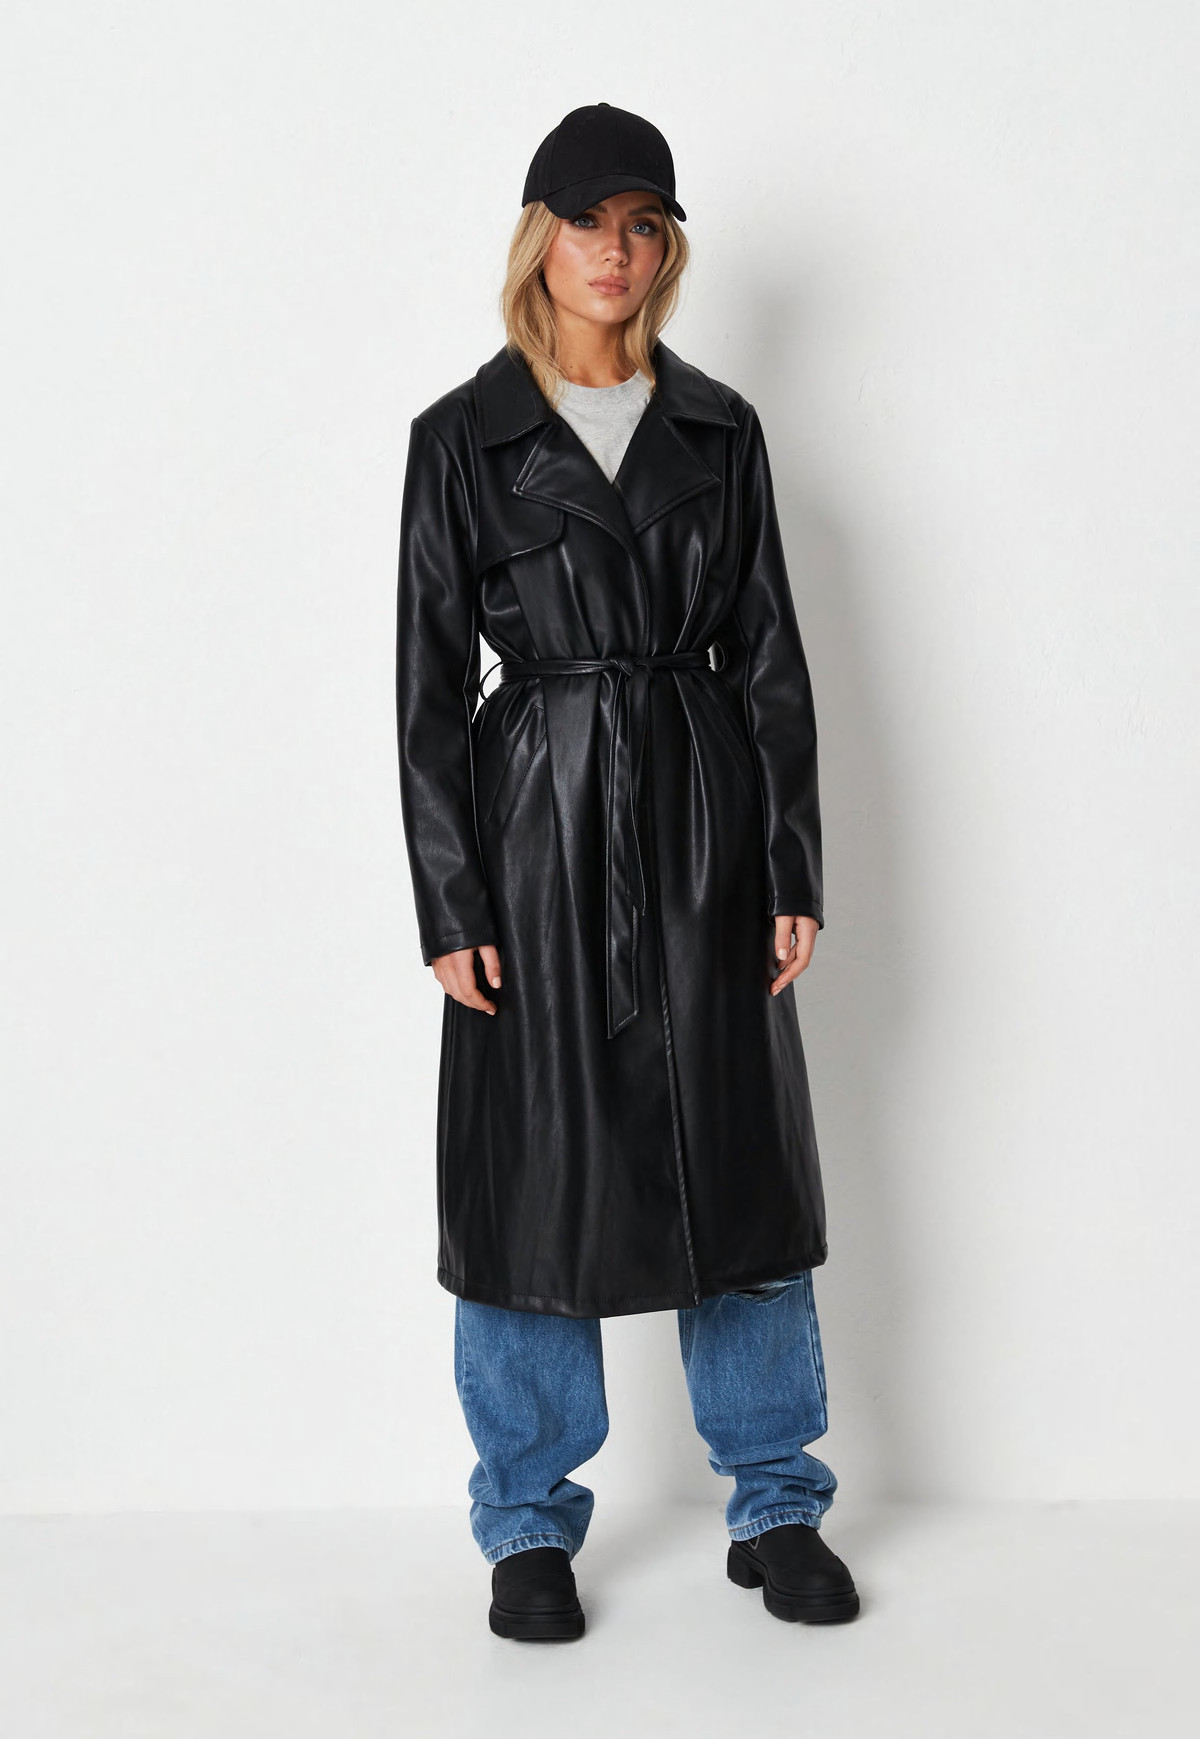 Missguided Black Faux Leather Trench coat